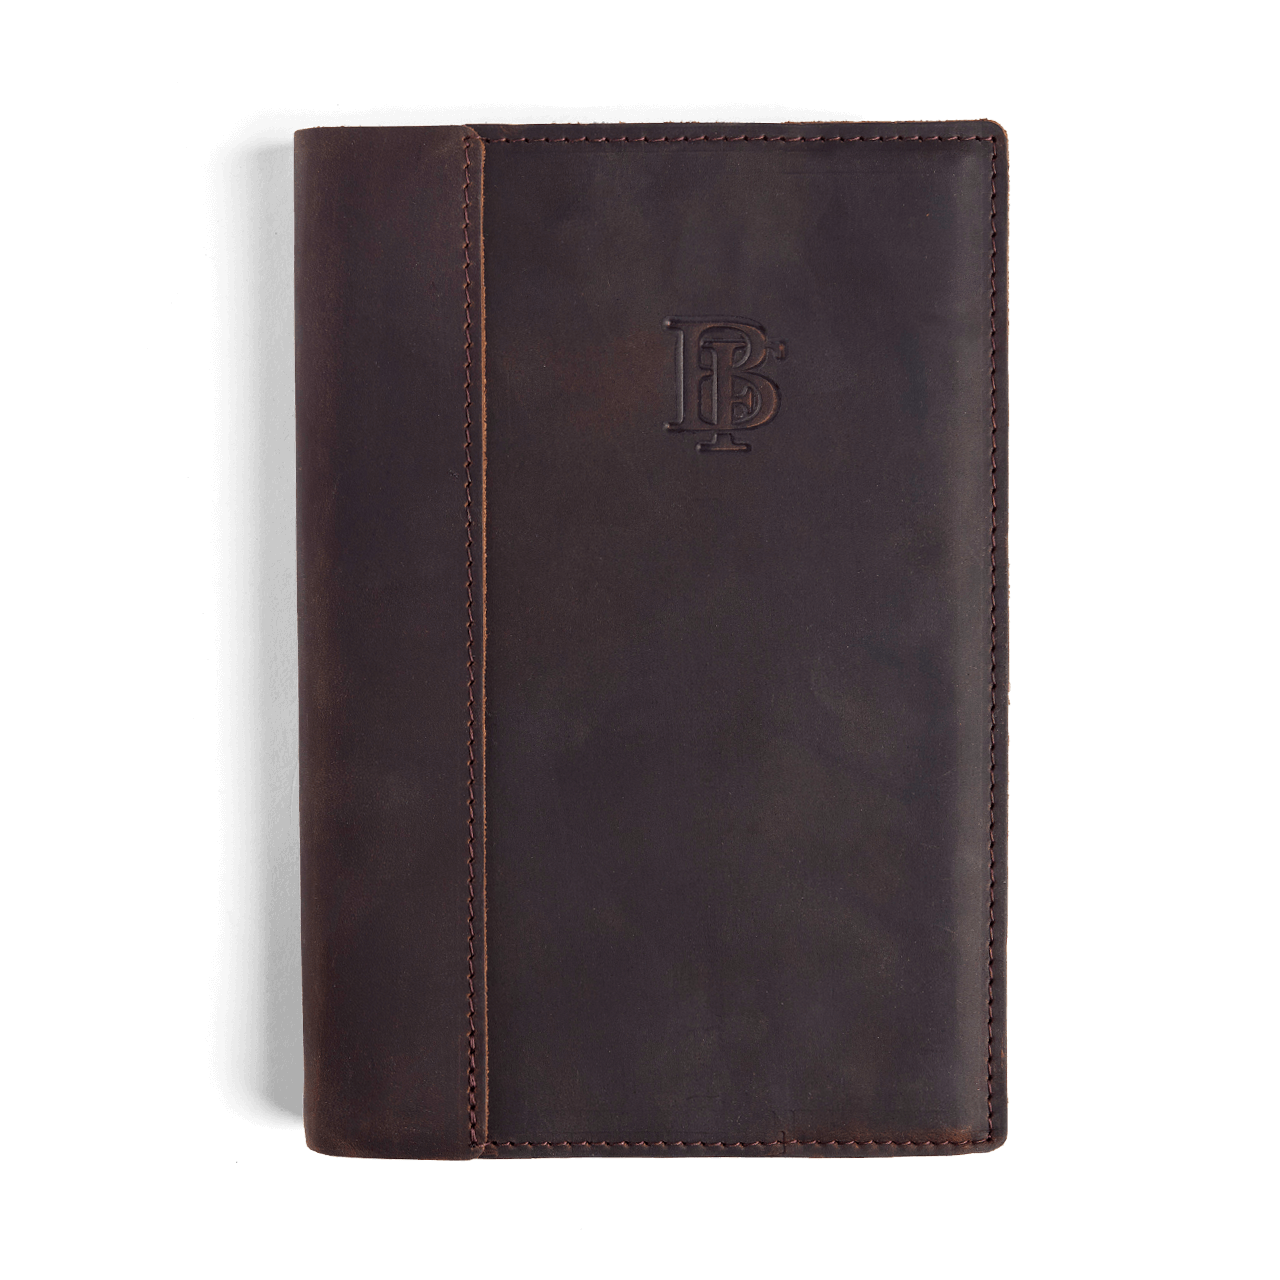 Large Blank Sketchbook by Gallery Leather - 9.75x7.5